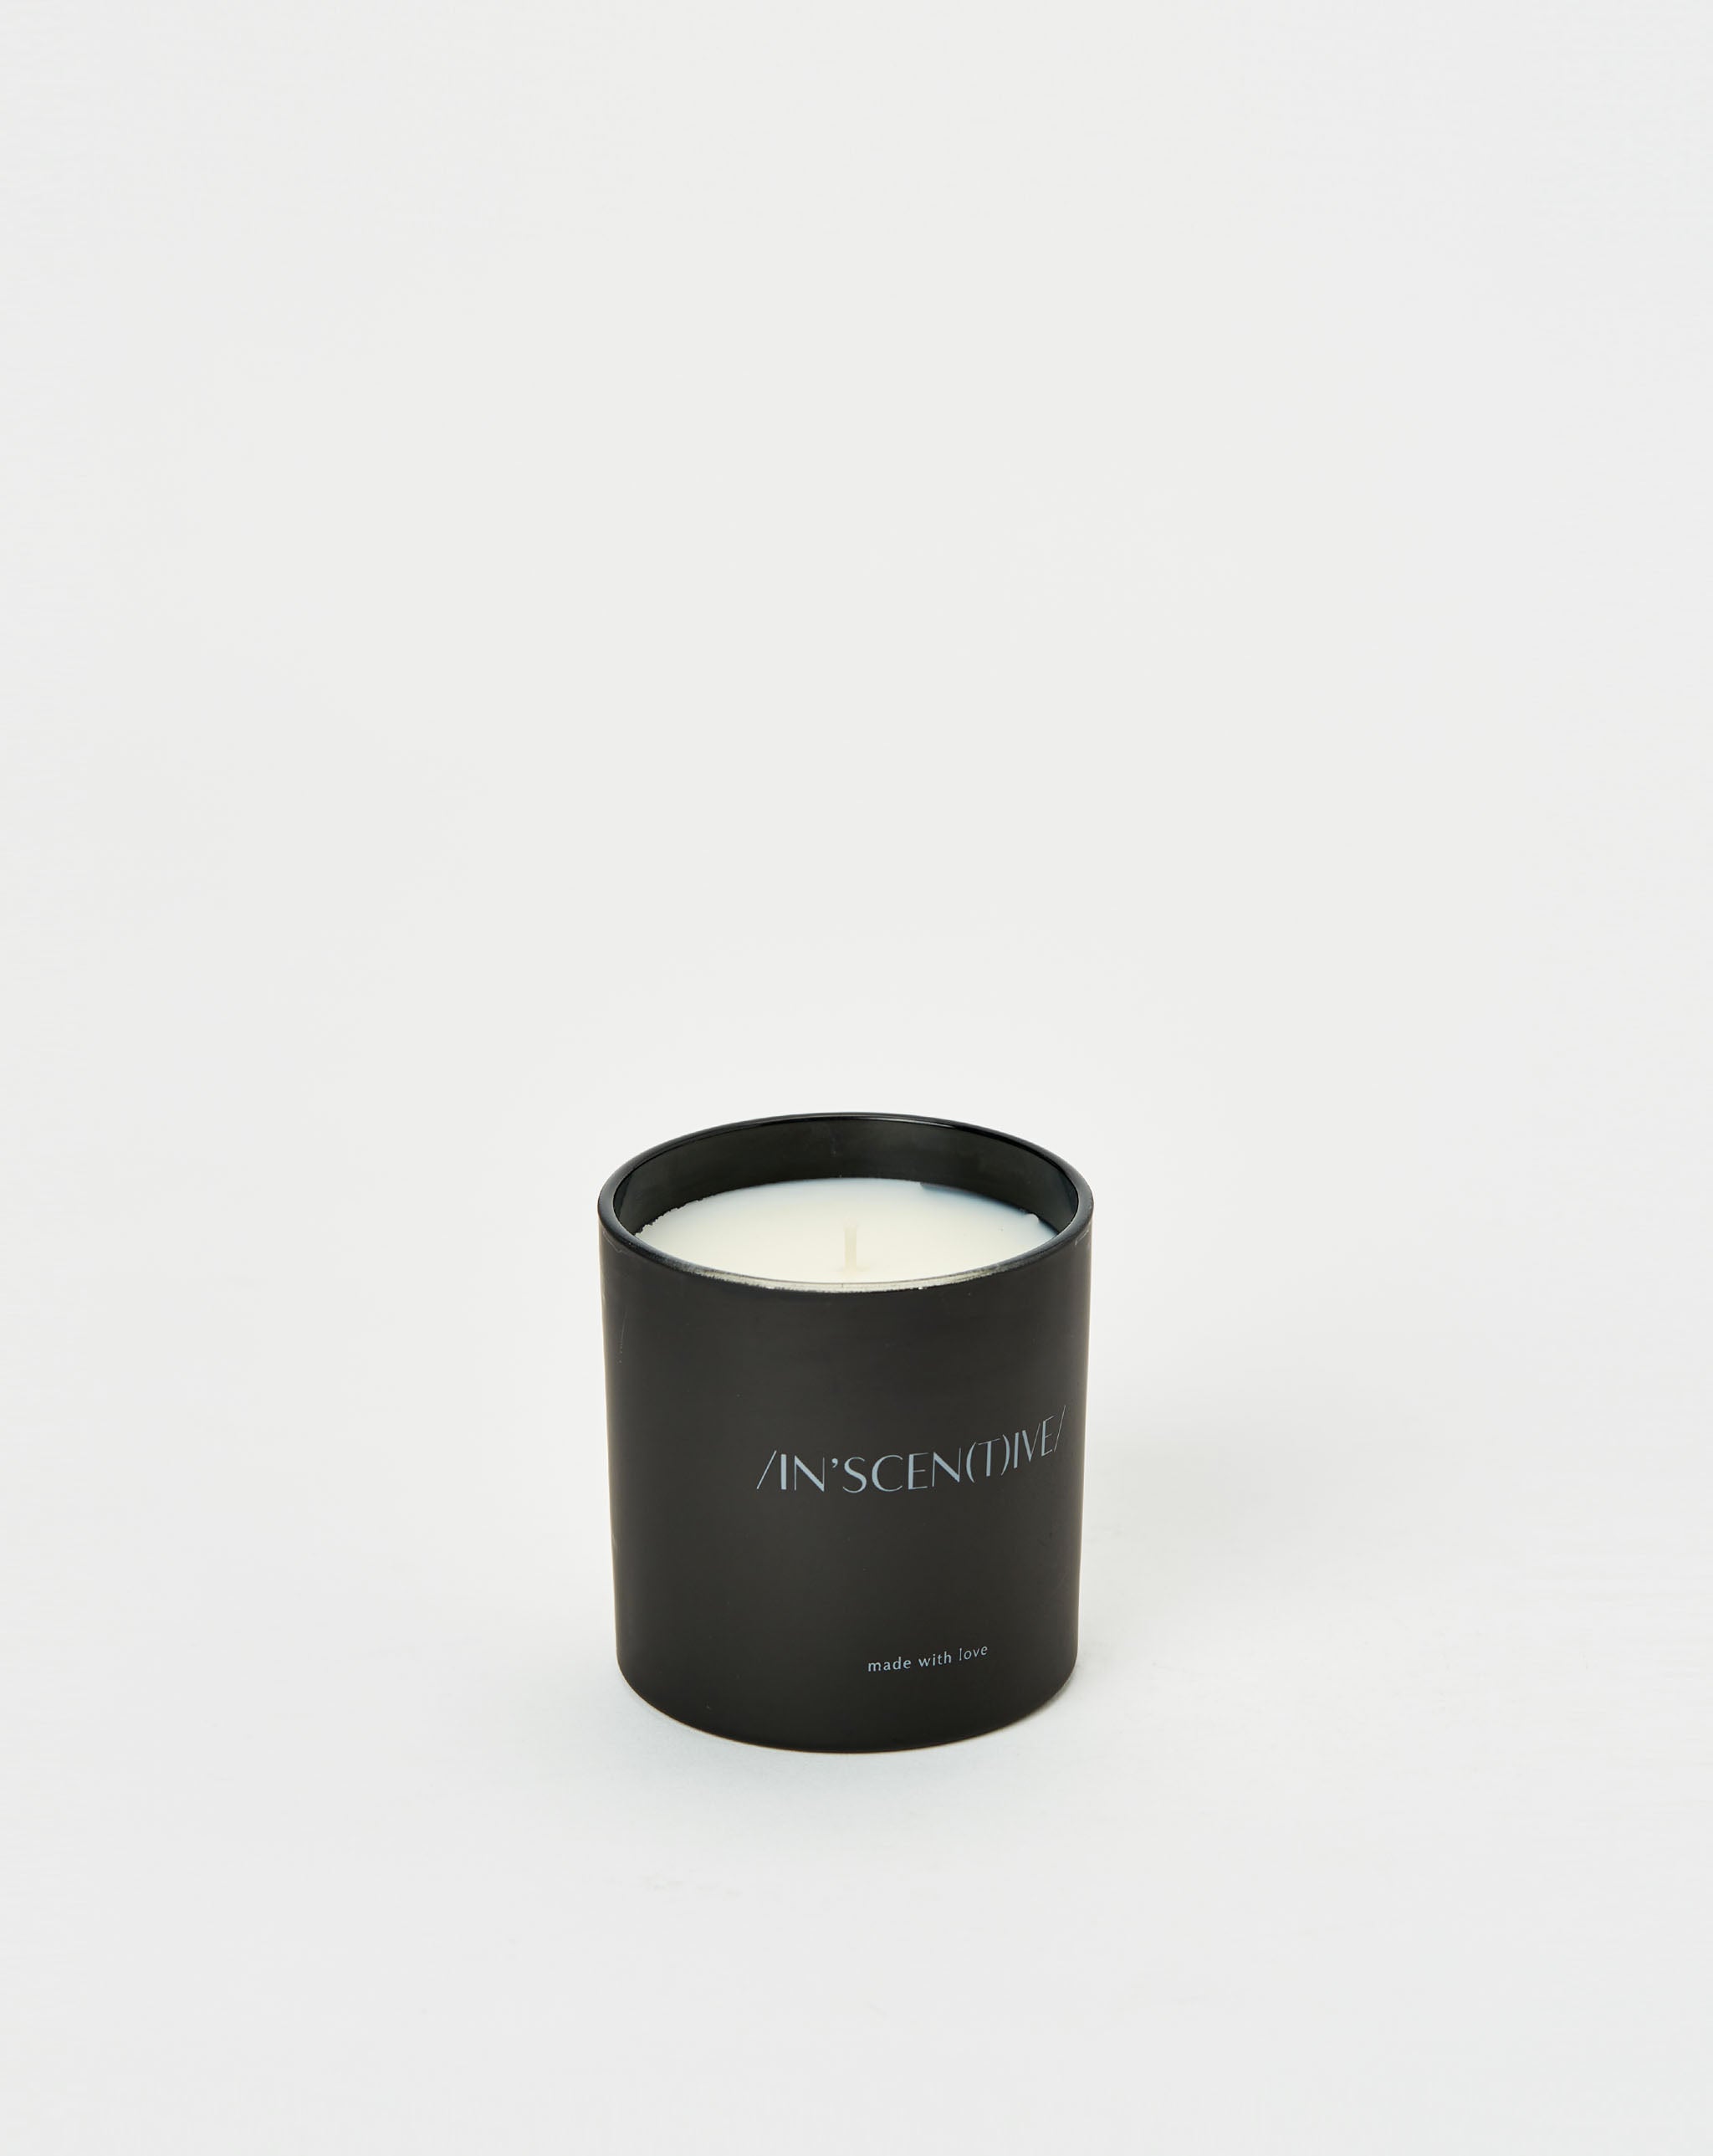 /IN'SCEN(T)IVE/ Grounded Candle  - Cheap Erlebniswelt-fliegenfischen Jordan outlet